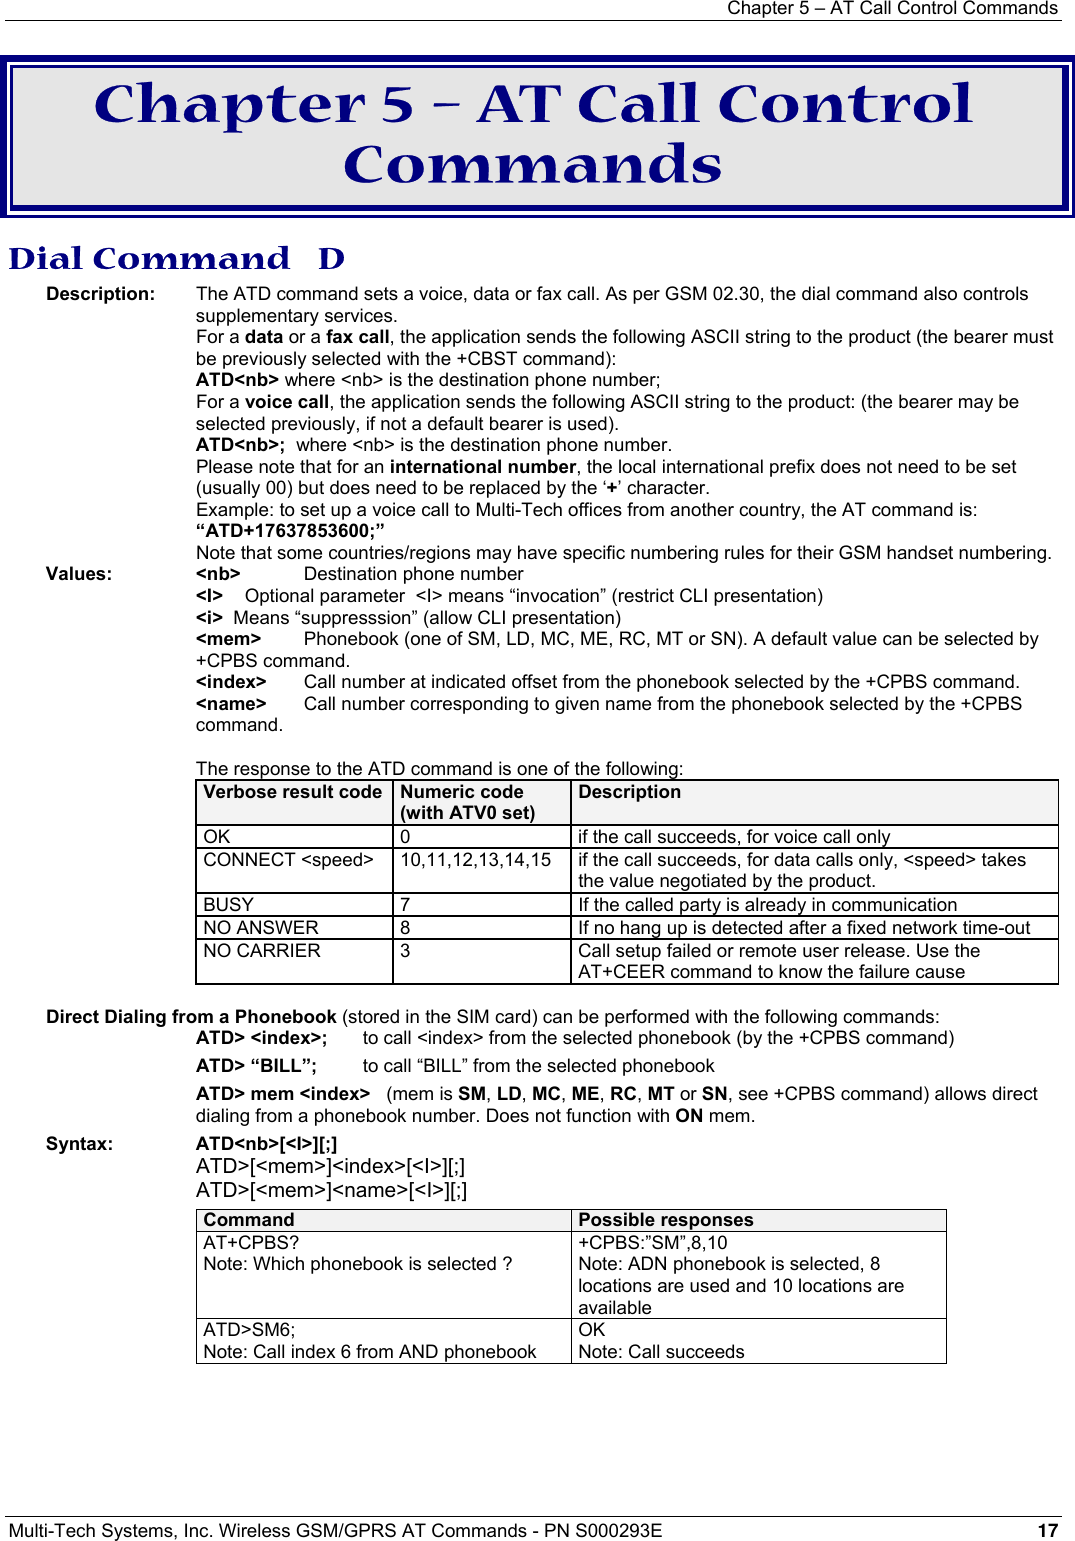 Chapter 5 – AT Call Control Commands Multi-Tech Systems, Inc. Wireless GSM/GPRS AT Commands - PN S000293E 17  Chapter 5 – AT Call Control Commands Dial Command   D Description:  The ATD command sets a voice, data or fax call. As per GSM 02.30, the dial command also controls supplementary services.  For a data or a fax call, the application sends the following ASCII string to the product (the bearer must be previously selected with the +CBST command):  ATD&lt;nb&gt; where &lt;nb&gt; is the destination phone number;  For a voice call, the application sends the following ASCII string to the product: (the bearer may be selected previously, if not a default bearer is used).  ATD&lt;nb&gt;;  where &lt;nb&gt; is the destination phone number.   Please note that for an international number, the local international prefix does not need to be set (usually 00) but does need to be replaced by the ‘+’ character.   Example: to set up a voice call to Multi-Tech offices from another country, the AT command is: “ATD+17637853600;”   Note that some countries/regions may have specific numbering rules for their GSM handset numbering. Values: &lt;nb&gt;  Destination phone number   &lt;I&gt;    Optional parameter  &lt;I&gt; means “invocation” (restrict CLI presentation)    &lt;i&gt;  Means “suppresssion” (allow CLI presentation)  &lt;mem&gt;    Phonebook (one of SM, LD, MC, ME, RC, MT or SN). A default value can be selected by +CPBS command.   &lt;index&gt;   Call number at indicated offset from the phonebook selected by the +CPBS command.  &lt;name&gt;  Call number corresponding to given name from the phonebook selected by the +CPBS command.  The response to the ATD command is one of the following: Verbose result code  Numeric code (with ATV0 set) Description OK  0  if the call succeeds, for voice call only CONNECT &lt;speed&gt;  10,11,12,13,14,15  if the call succeeds, for data calls only, &lt;speed&gt; takes the value negotiated by the product. BUSY  7  If the called party is already in communication NO ANSWER  8  If no hang up is detected after a fixed network time-out NO CARRIER  3  Call setup failed or remote user release. Use the AT+CEER command to know the failure cause    Direct Dialing from a Phonebook (stored in the SIM card) can be performed with the following commands: ATD&gt; &lt;index&gt;;  to call &lt;index&gt; from the selected phonebook (by the +CPBS command)  ATD&gt; “BILL”;  to call “BILL” from the selected phonebook ATD&gt; mem &lt;index&gt;   (mem is SM, LD, MC, ME, RC, MT or SN, see +CPBS command) allows direct dialing from a phonebook number. Does not function with ON mem. Syntax: ATD&lt;nb&gt;[&lt;I&gt;][;] ATD&gt;[&lt;mem&gt;]&lt;index&gt;[&lt;I&gt;][;] ATD&gt;[&lt;mem&gt;]&lt;name&gt;[&lt;I&gt;][;] Command  Possible responses AT+CPBS? Note: Which phonebook is selected ? +CPBS:”SM”,8,10 Note: ADN phonebook is selected, 8 locations are used and 10 locations are available ATD&gt;SM6; Note: Call index 6 from AND phonebook  OK  Note: Call succeeds  